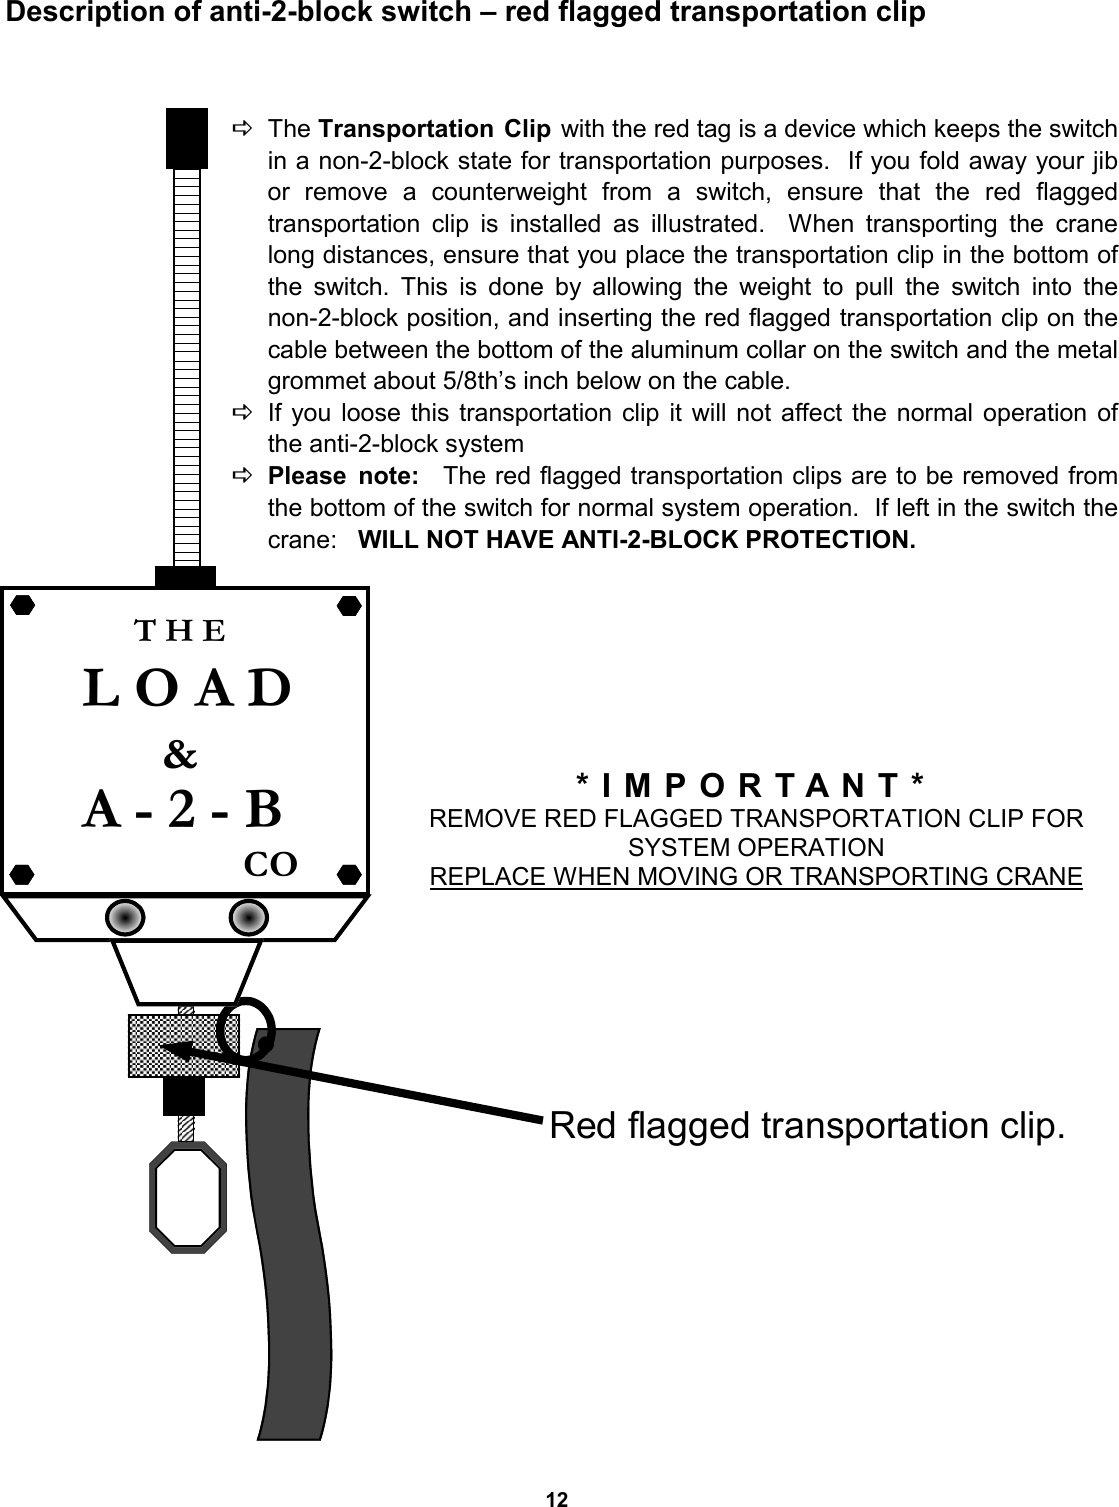 12 DThe Transportation Clip with the red tag is a device which keeps the switch in a non-2-block state for transportation purposes.  If you fold away your jib or remove a counterweight from a switch, ensure that the red flagged            transportation clip is installed as illustrated.  When transporting the crane long distances, ensure that you place the transportation clip in the bottom of the switch. This is done by allowing the weight to pull the switch into the            non-2-block position, and inserting the red flagged transportation clip on the     cable between the bottom of the aluminum collar on the switch and the metal grommet about 5/8th’s inch below on the cable. DIf you loose this transportation clip it will not affect the normal operation of the anti-2-block system DPlease note:  The red flagged transportation clips are to be removed from the bottom of the switch for normal system operation.  If left in the switch the crane:   WILL NOT HAVE ANTI-2-BLOCK PROTECTION. L O A D T H E &amp; A - 2 - B CO Description of anti-2-block switch – red flagged transportation clip *IMPORTANT* REMOVE RED FLAGGED TRANSPORTATION CLIP FOR  SYSTEM OPERATION   REPLACE WHEN MOVING OR TRANSPORTING CRANE   Red flagged transportation clip. 